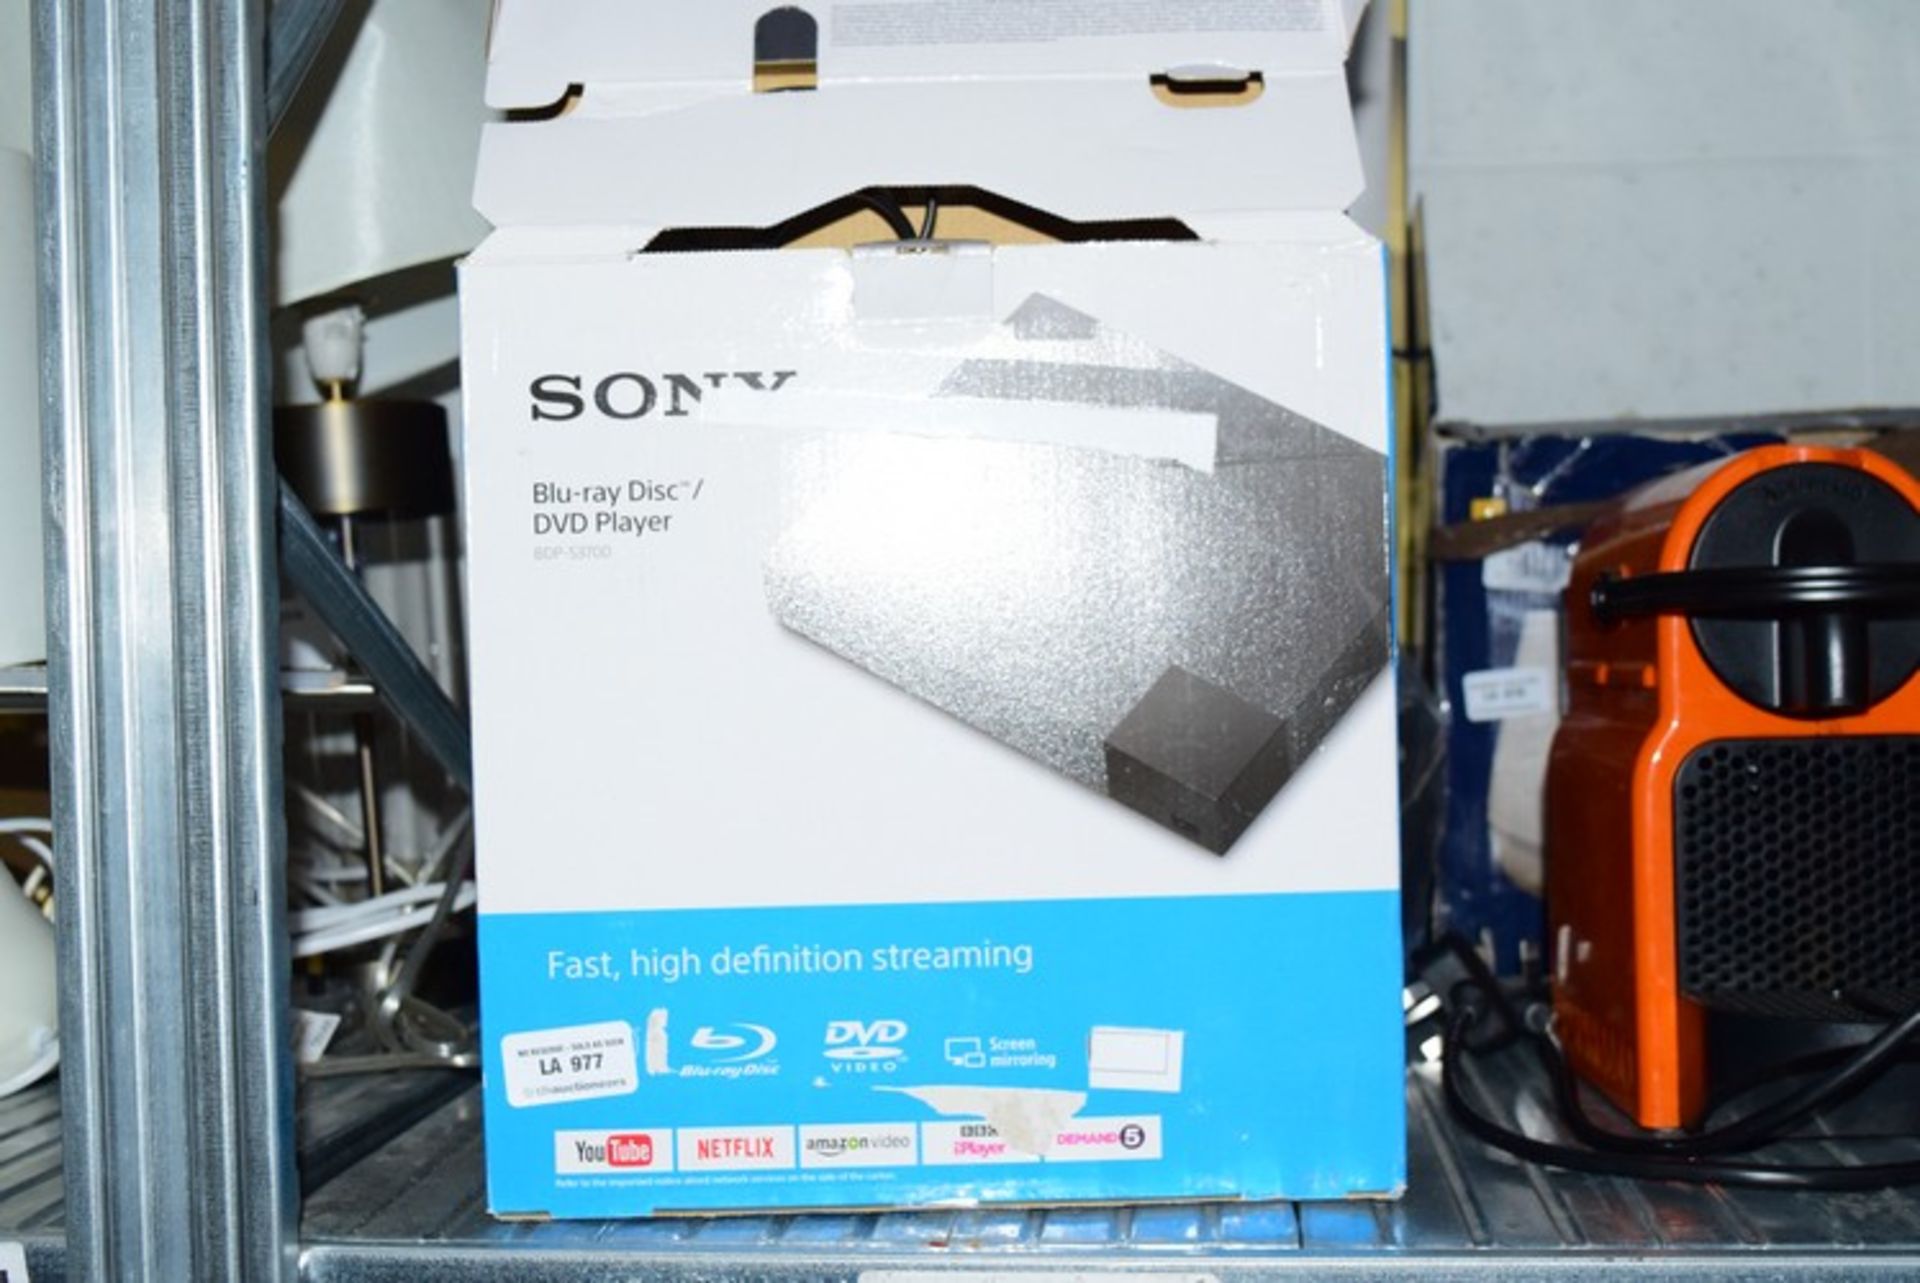 1 x SONY BLURAY AND DVD PLAYER RRP £85 12.01.18 *PLEASE NOTE THAT THE BID PRICE IS MULTIPLIED BY THE